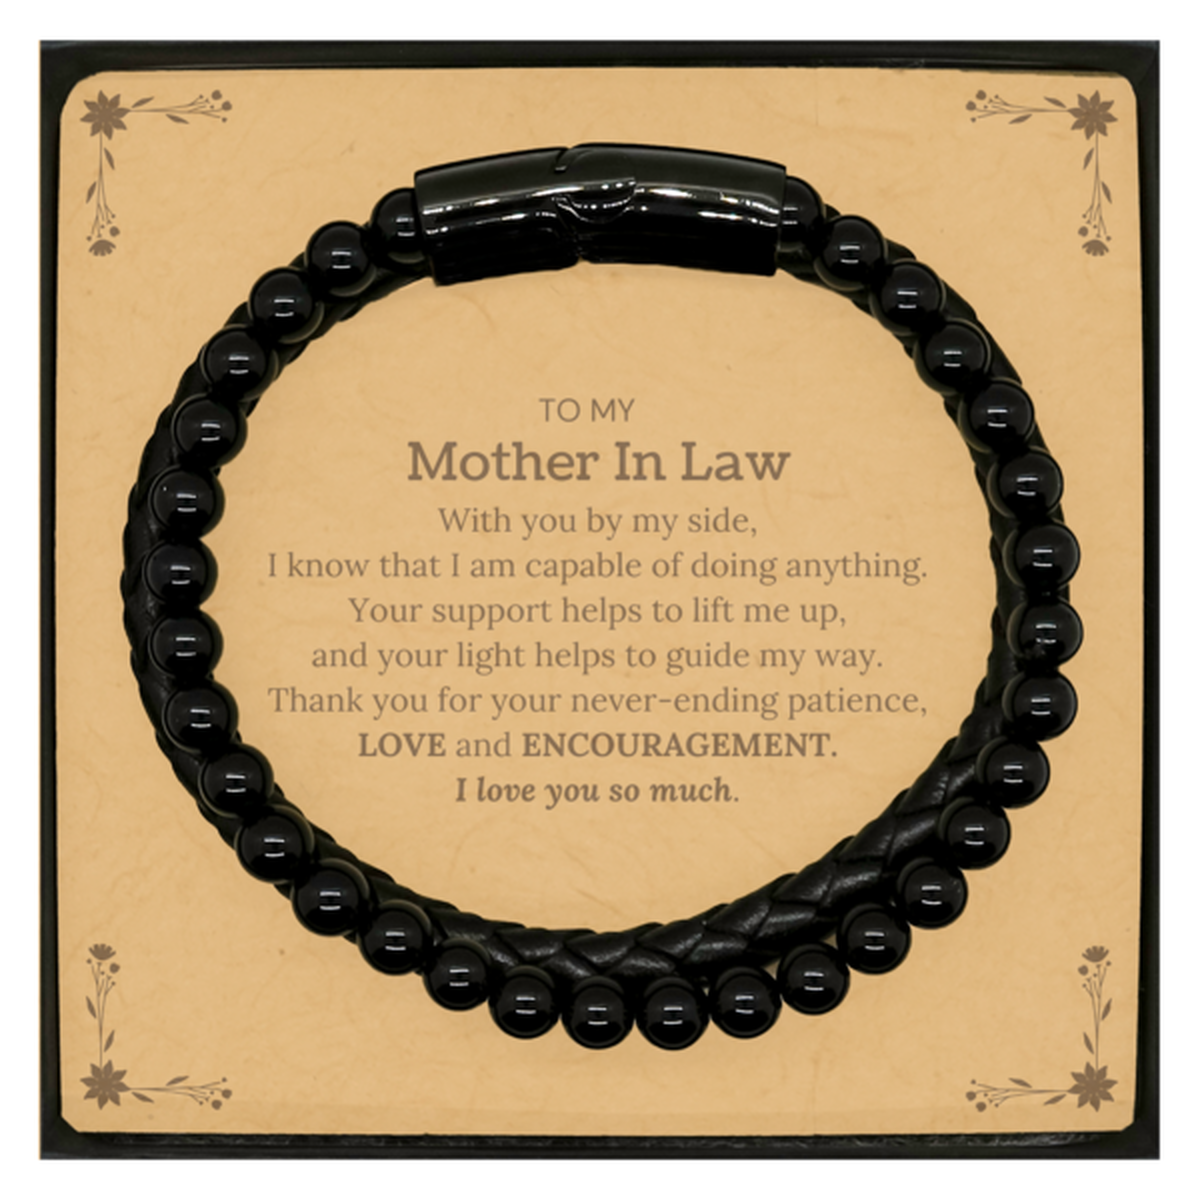 Appreciation Mother In Law Stone Leather Bracelets Gifts, To My Mother In Law Birthday Christmas Wedding Keepsake Gifts for Mother In Law With you by my side, I know that I am capable of doing anything. I love you so much